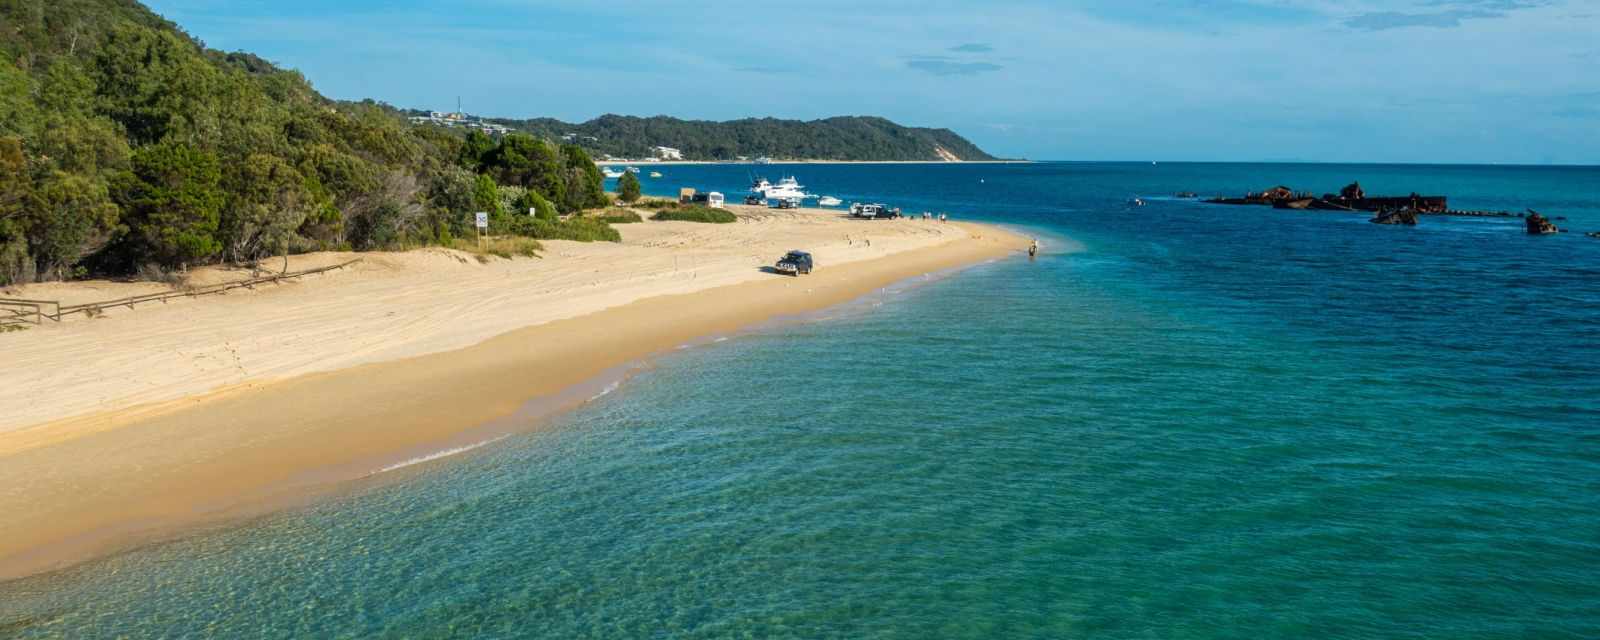 Things to Do and Camping at Moreton Island Close to Brisbane